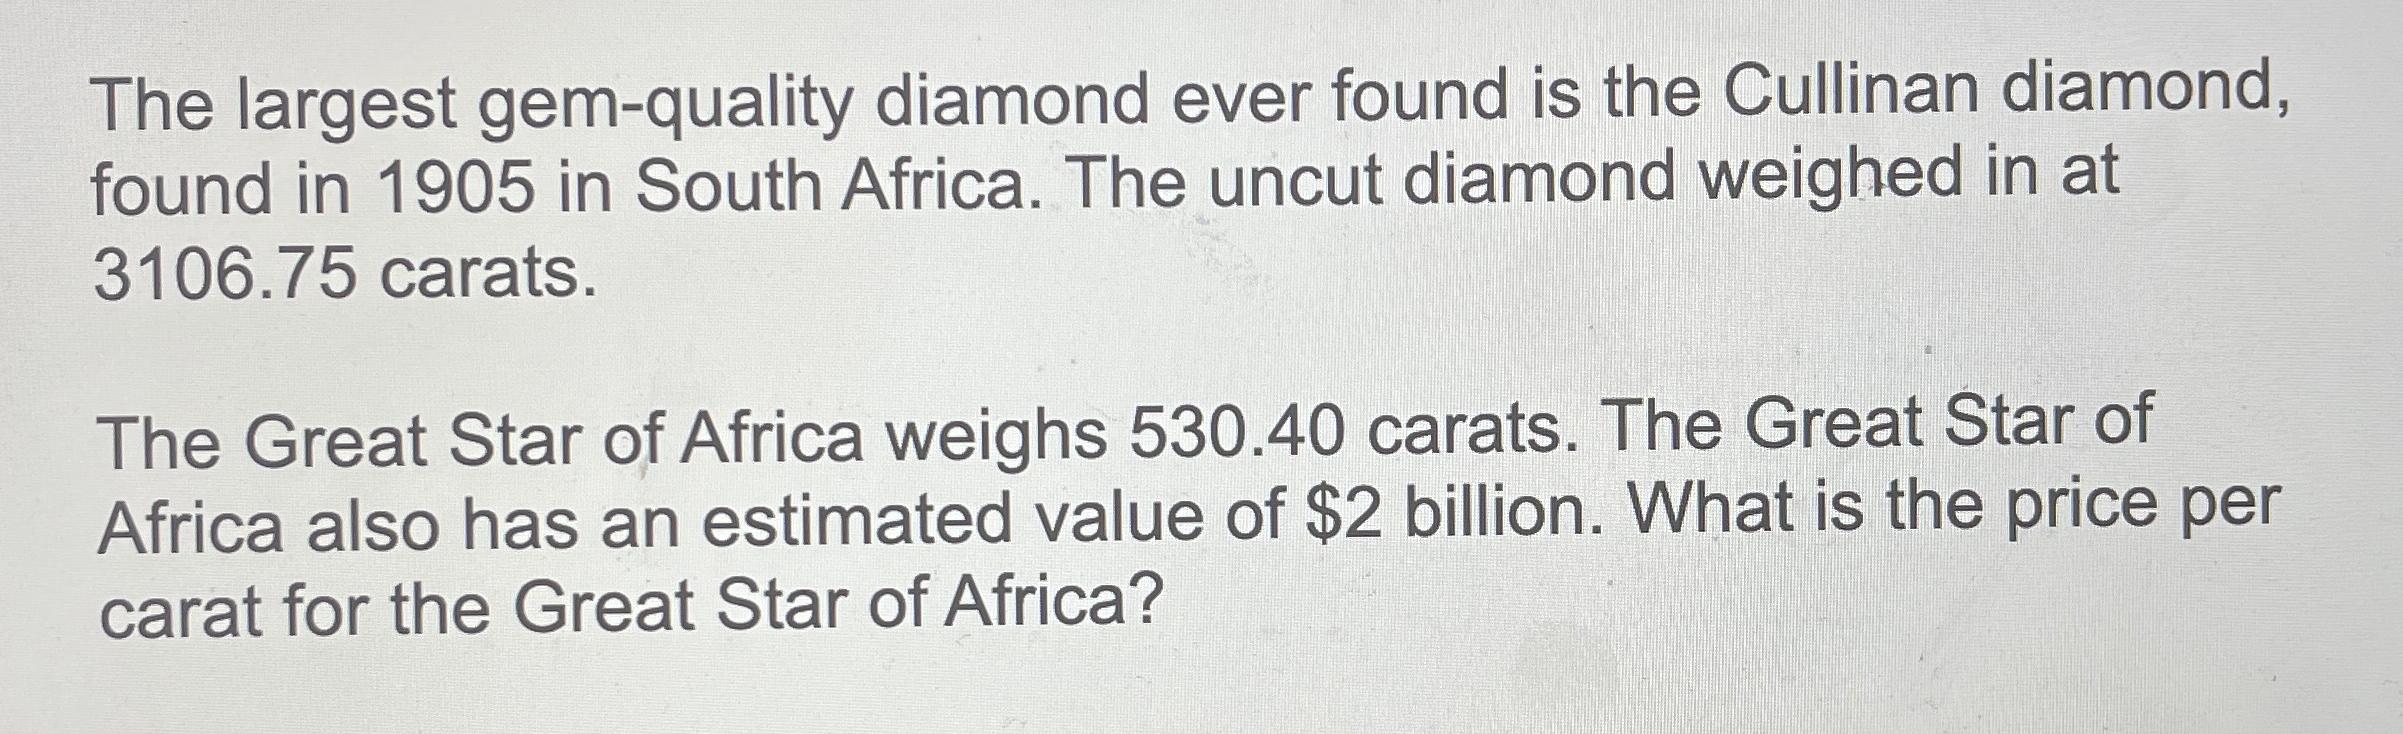 The largest gem-quality diamond ever found is the Cullinan diamond, found in 1905 in South Africa. The uncut